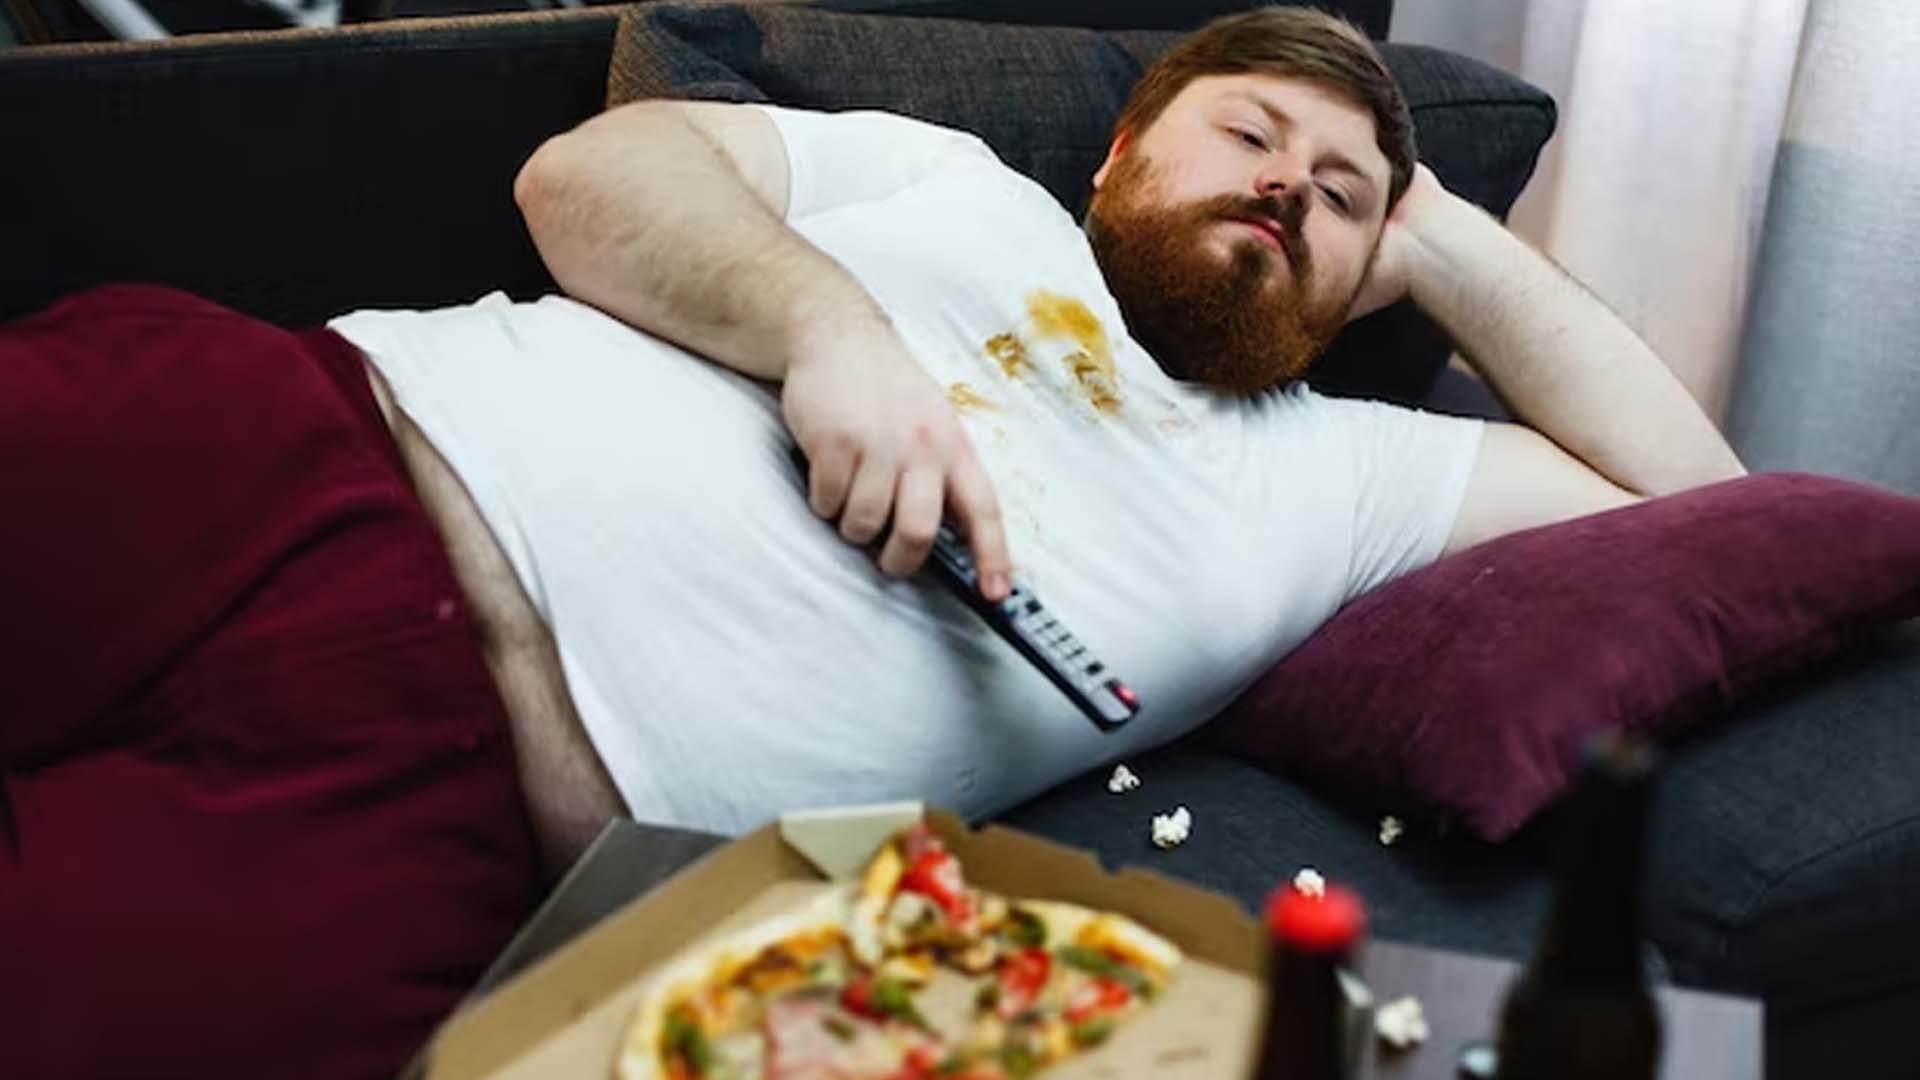 Man Lying Down After Eating